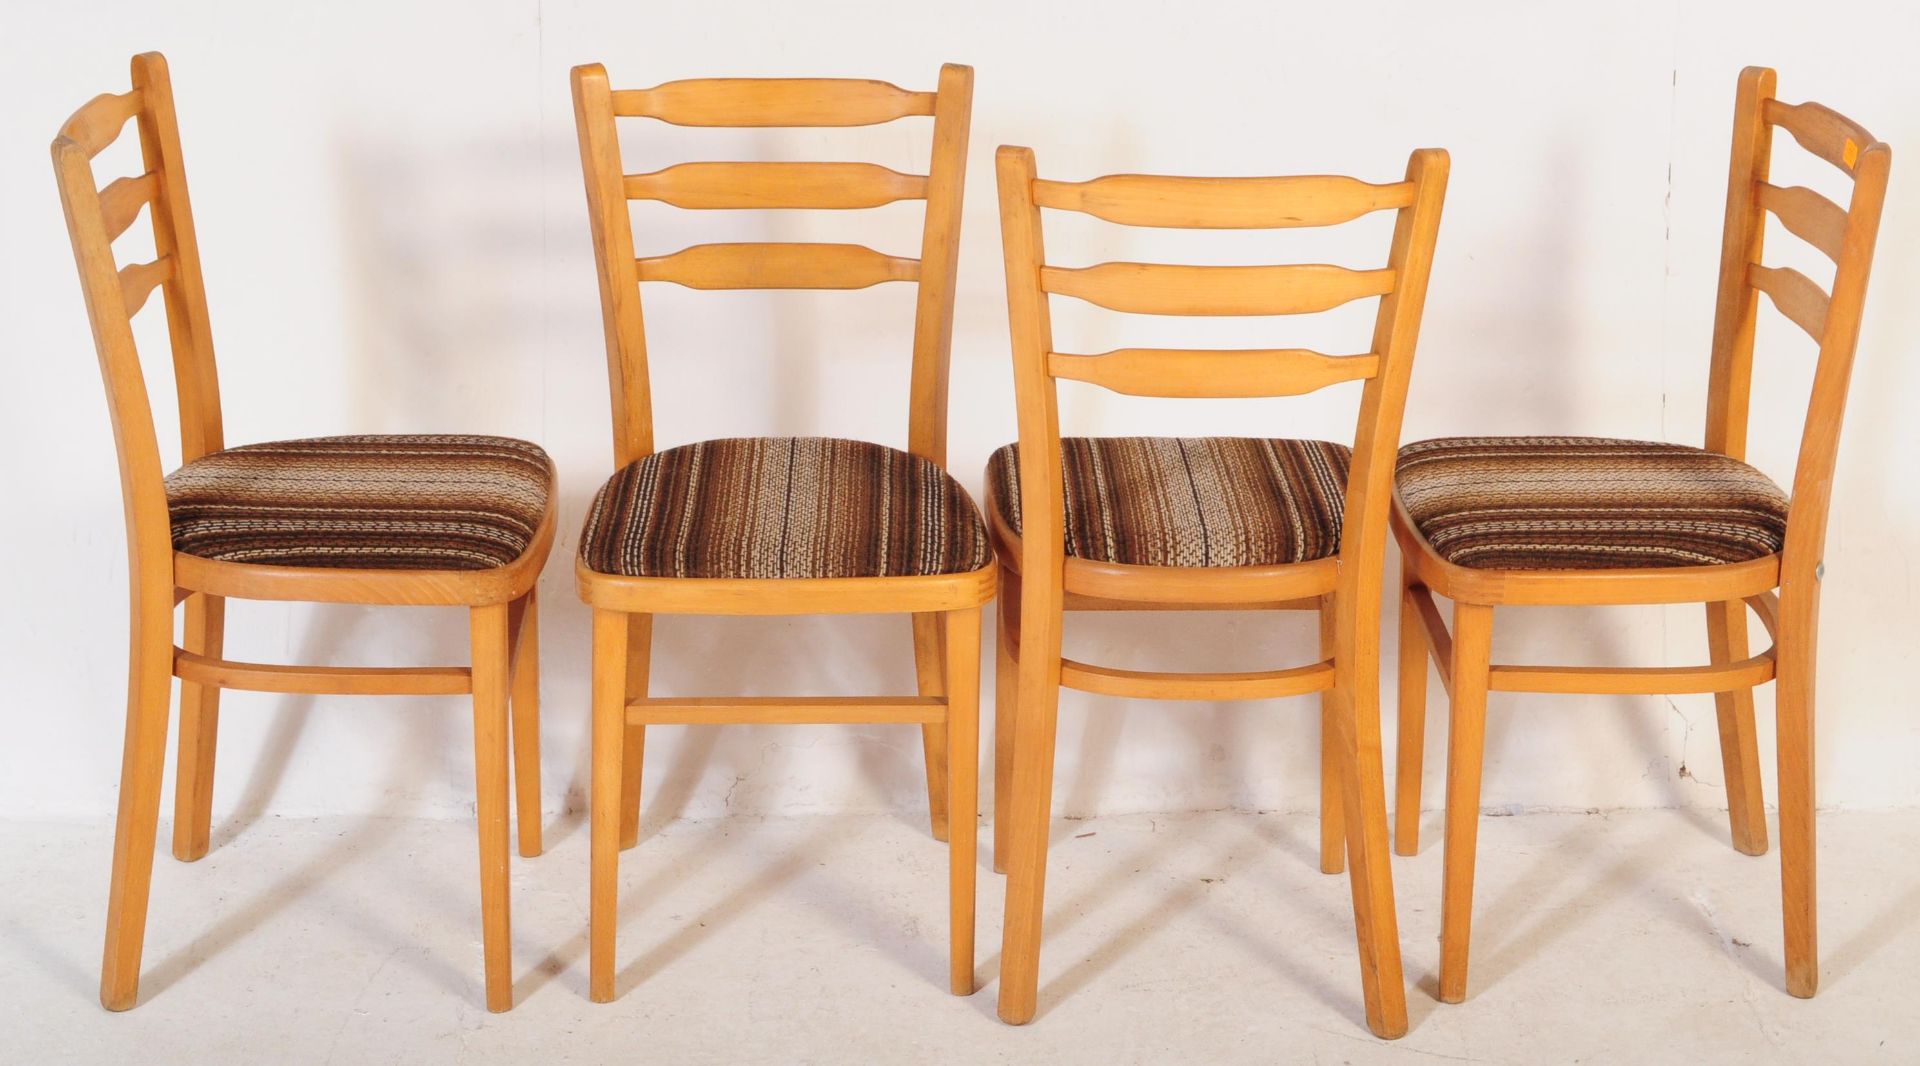 SIX VINTAGE RETRO 1960S KITCHEN DINING CHAIRS - Image 4 of 5